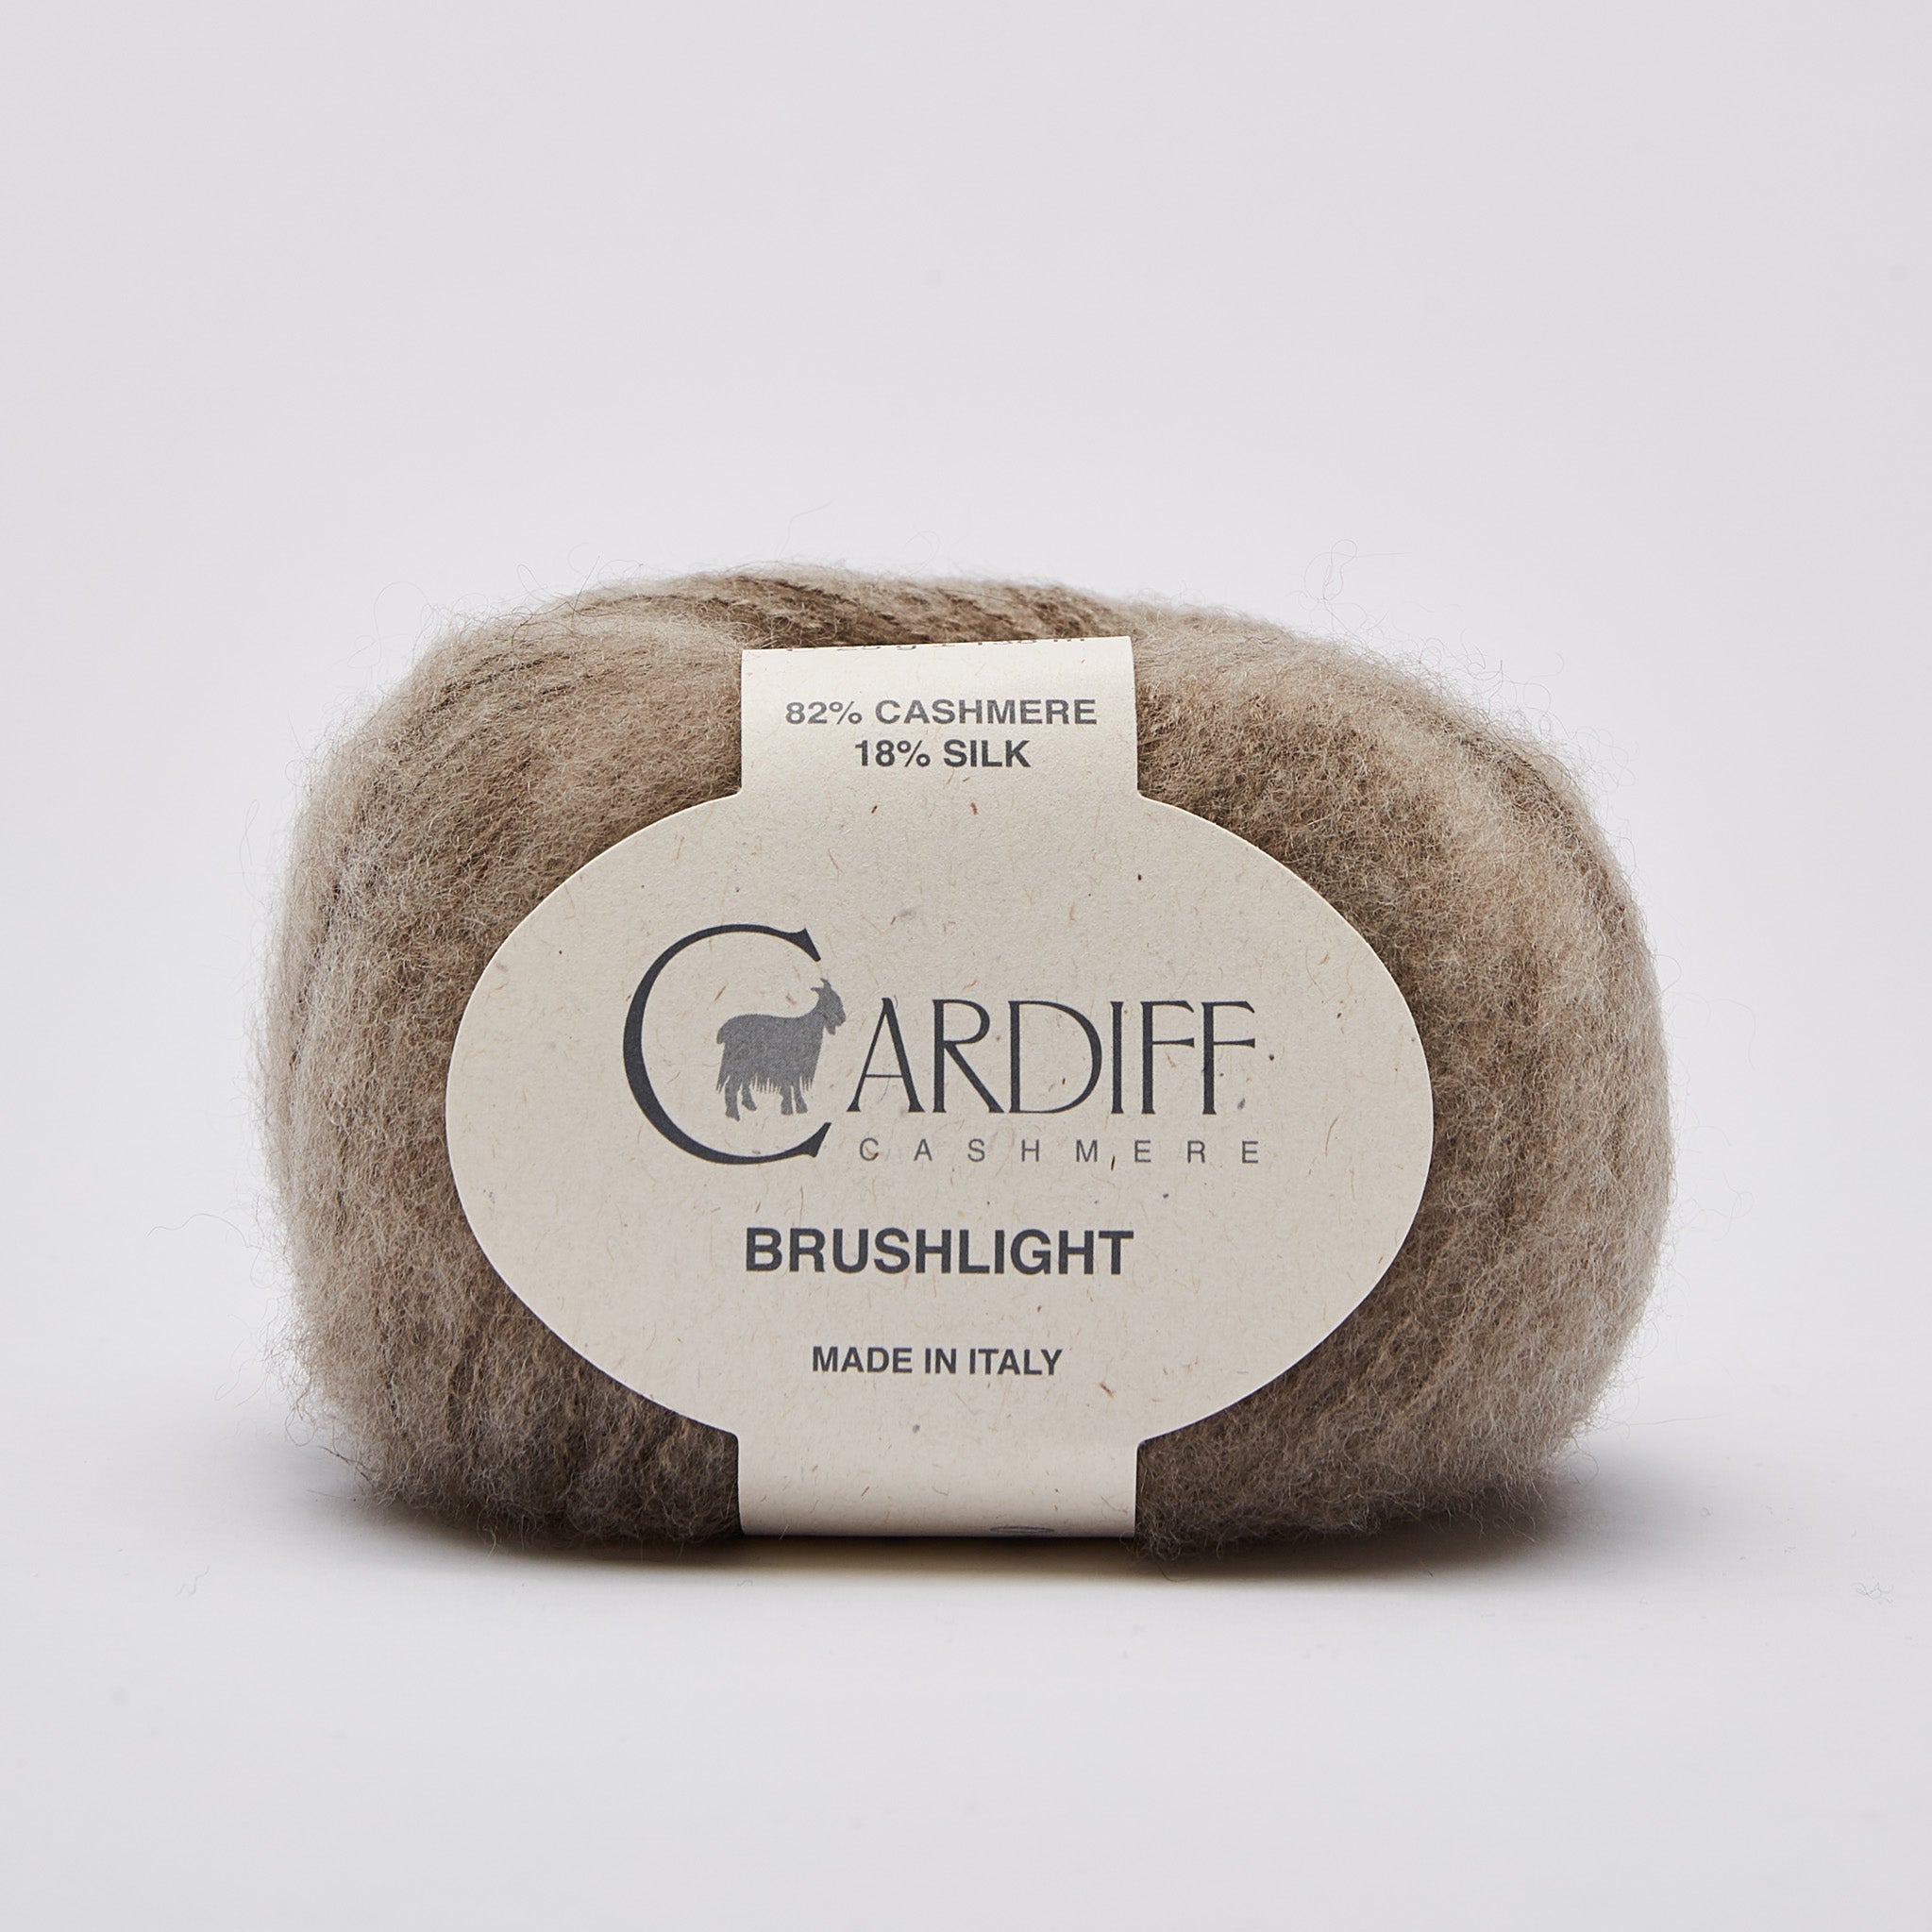 Cardiff Cashmere Brushlight brown [103]